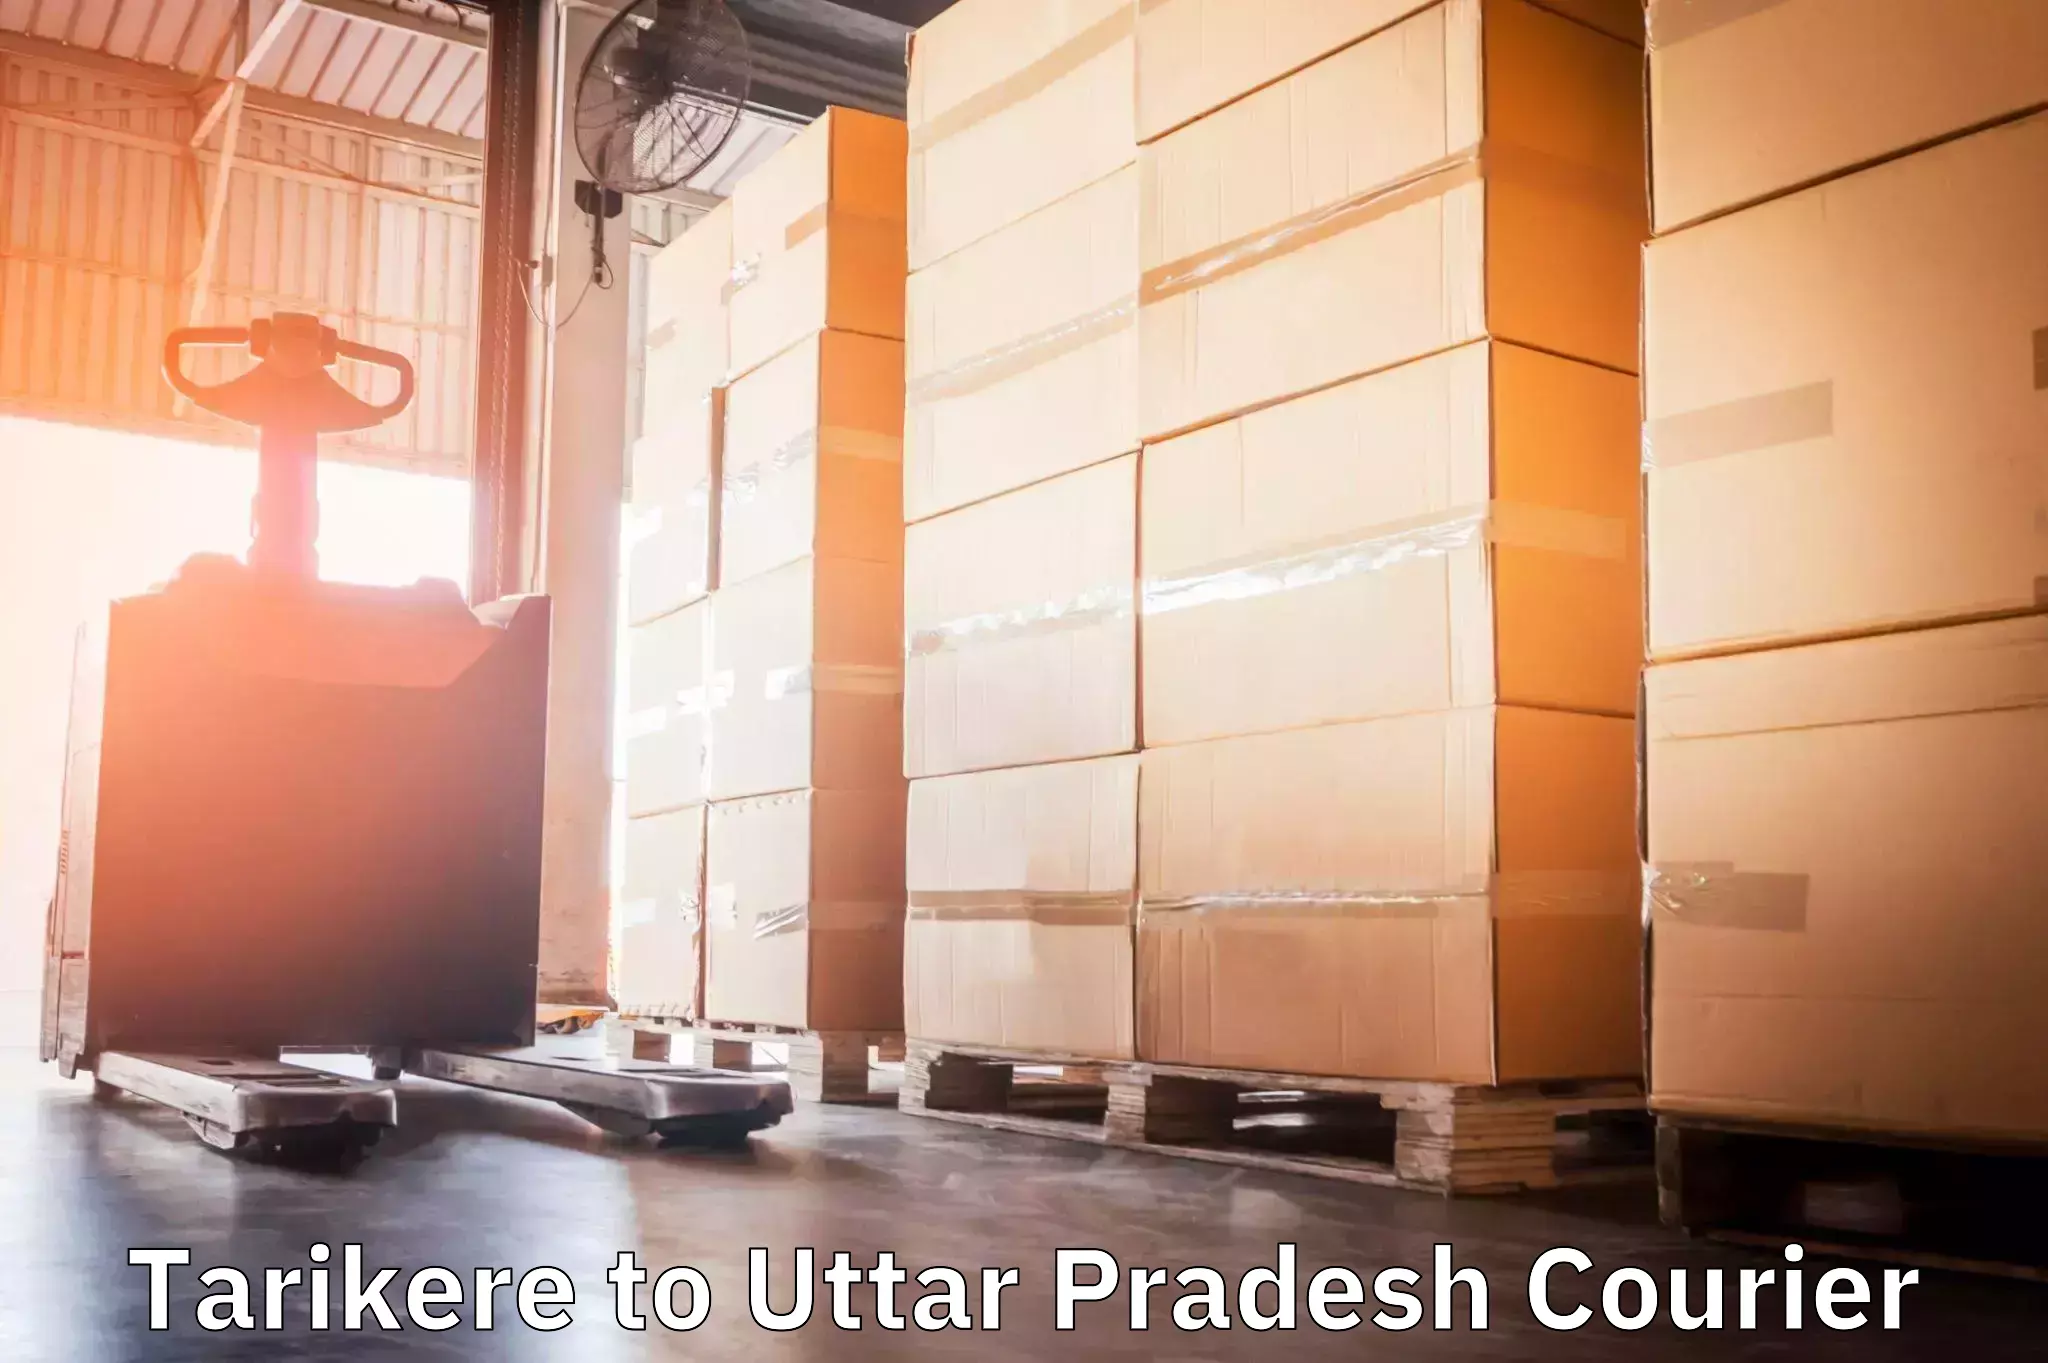 24-hour courier services Tarikere to Jalesar